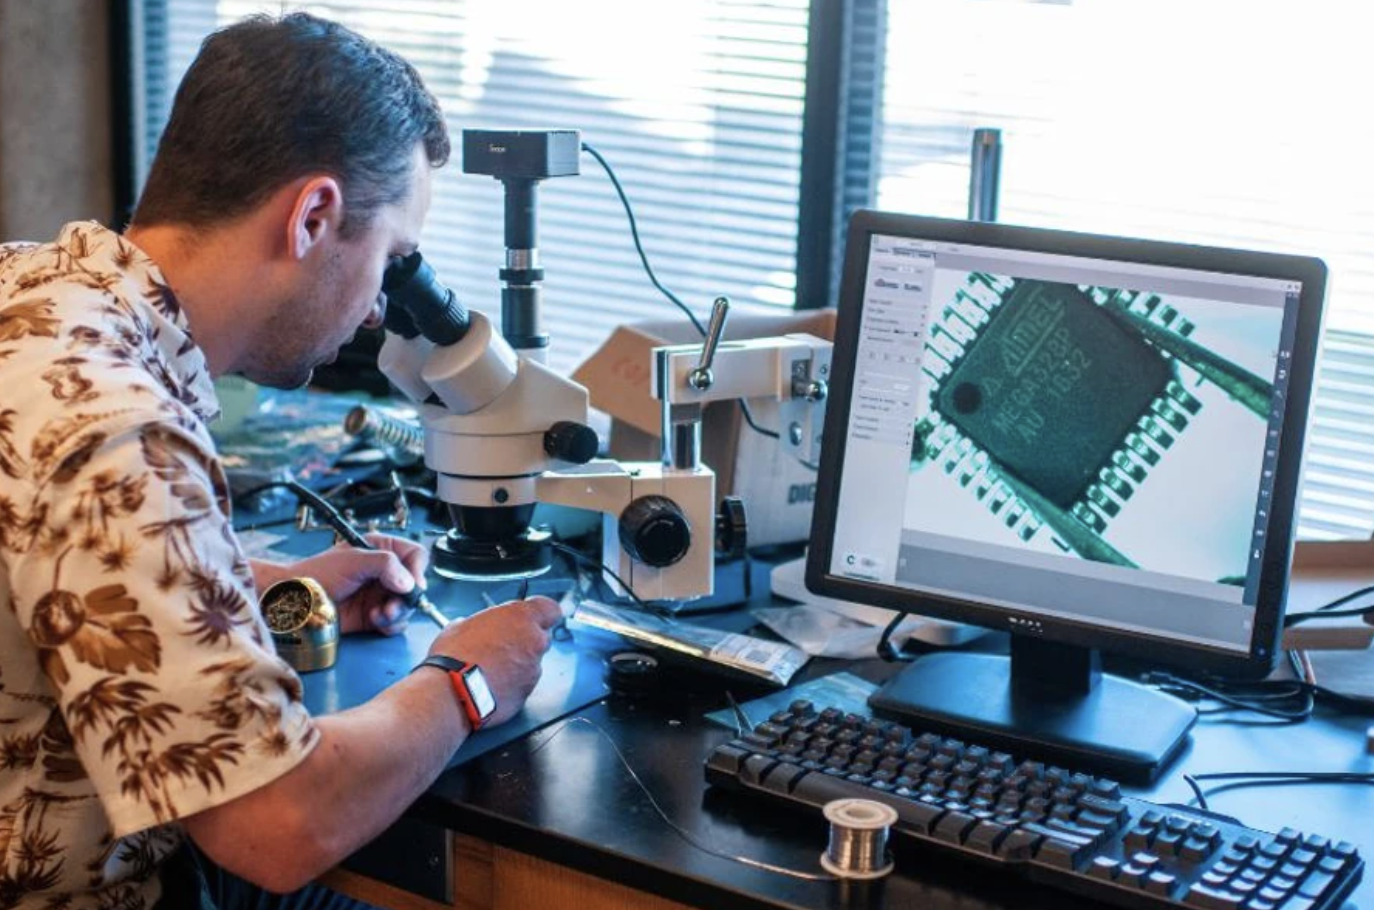 An engineering student looks into a microscope